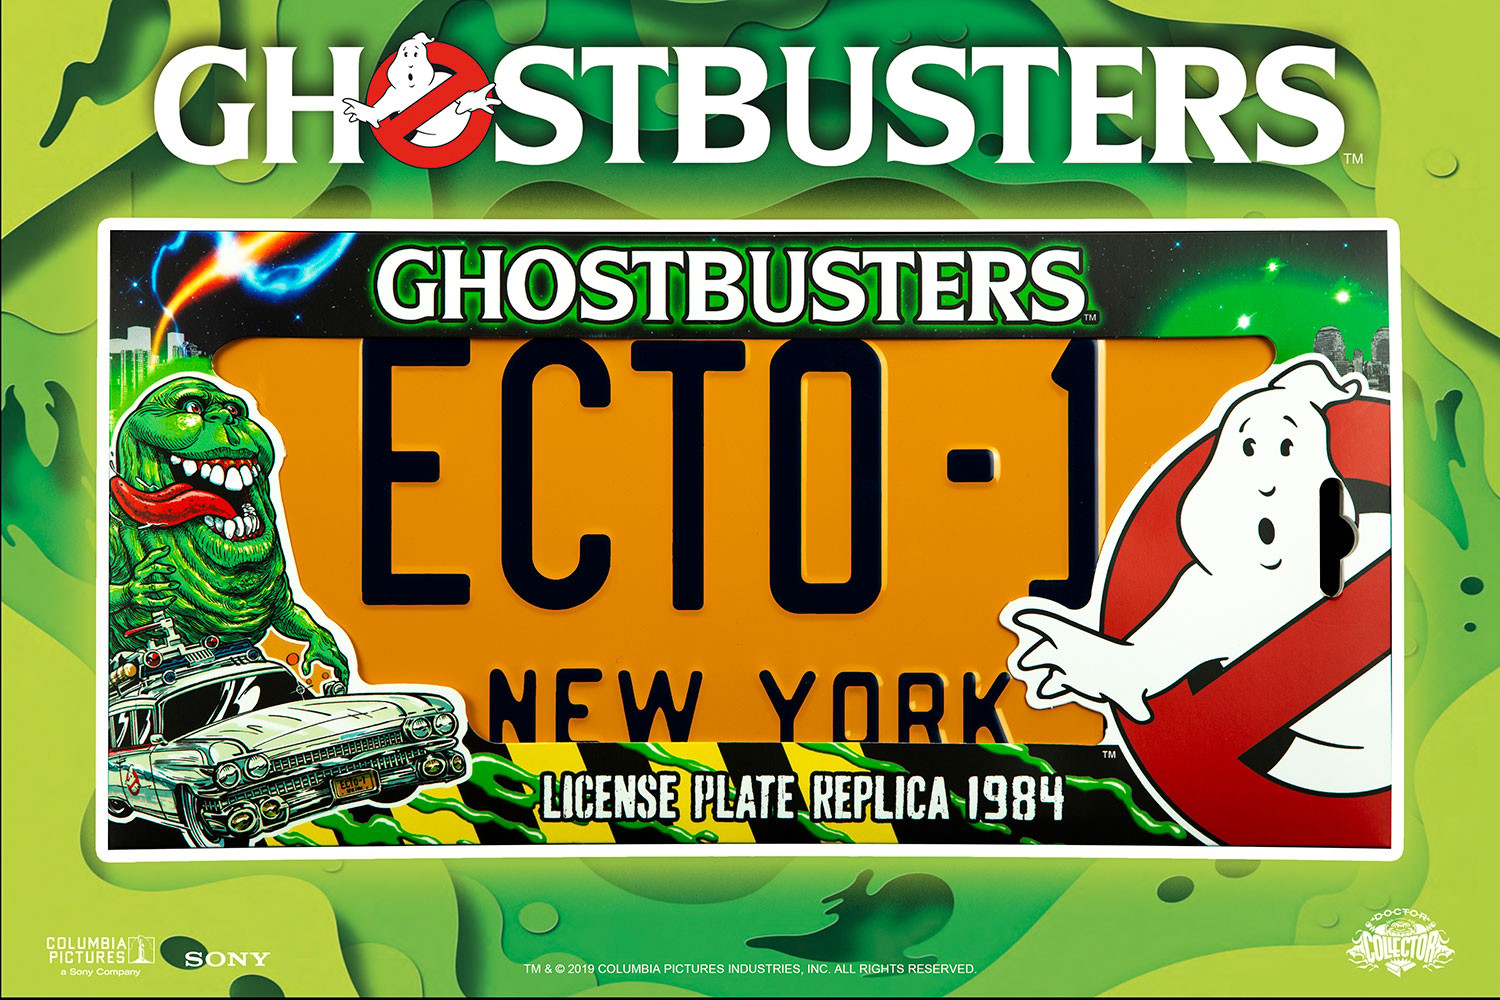 Ghostbusters ECTO-1 License Plate